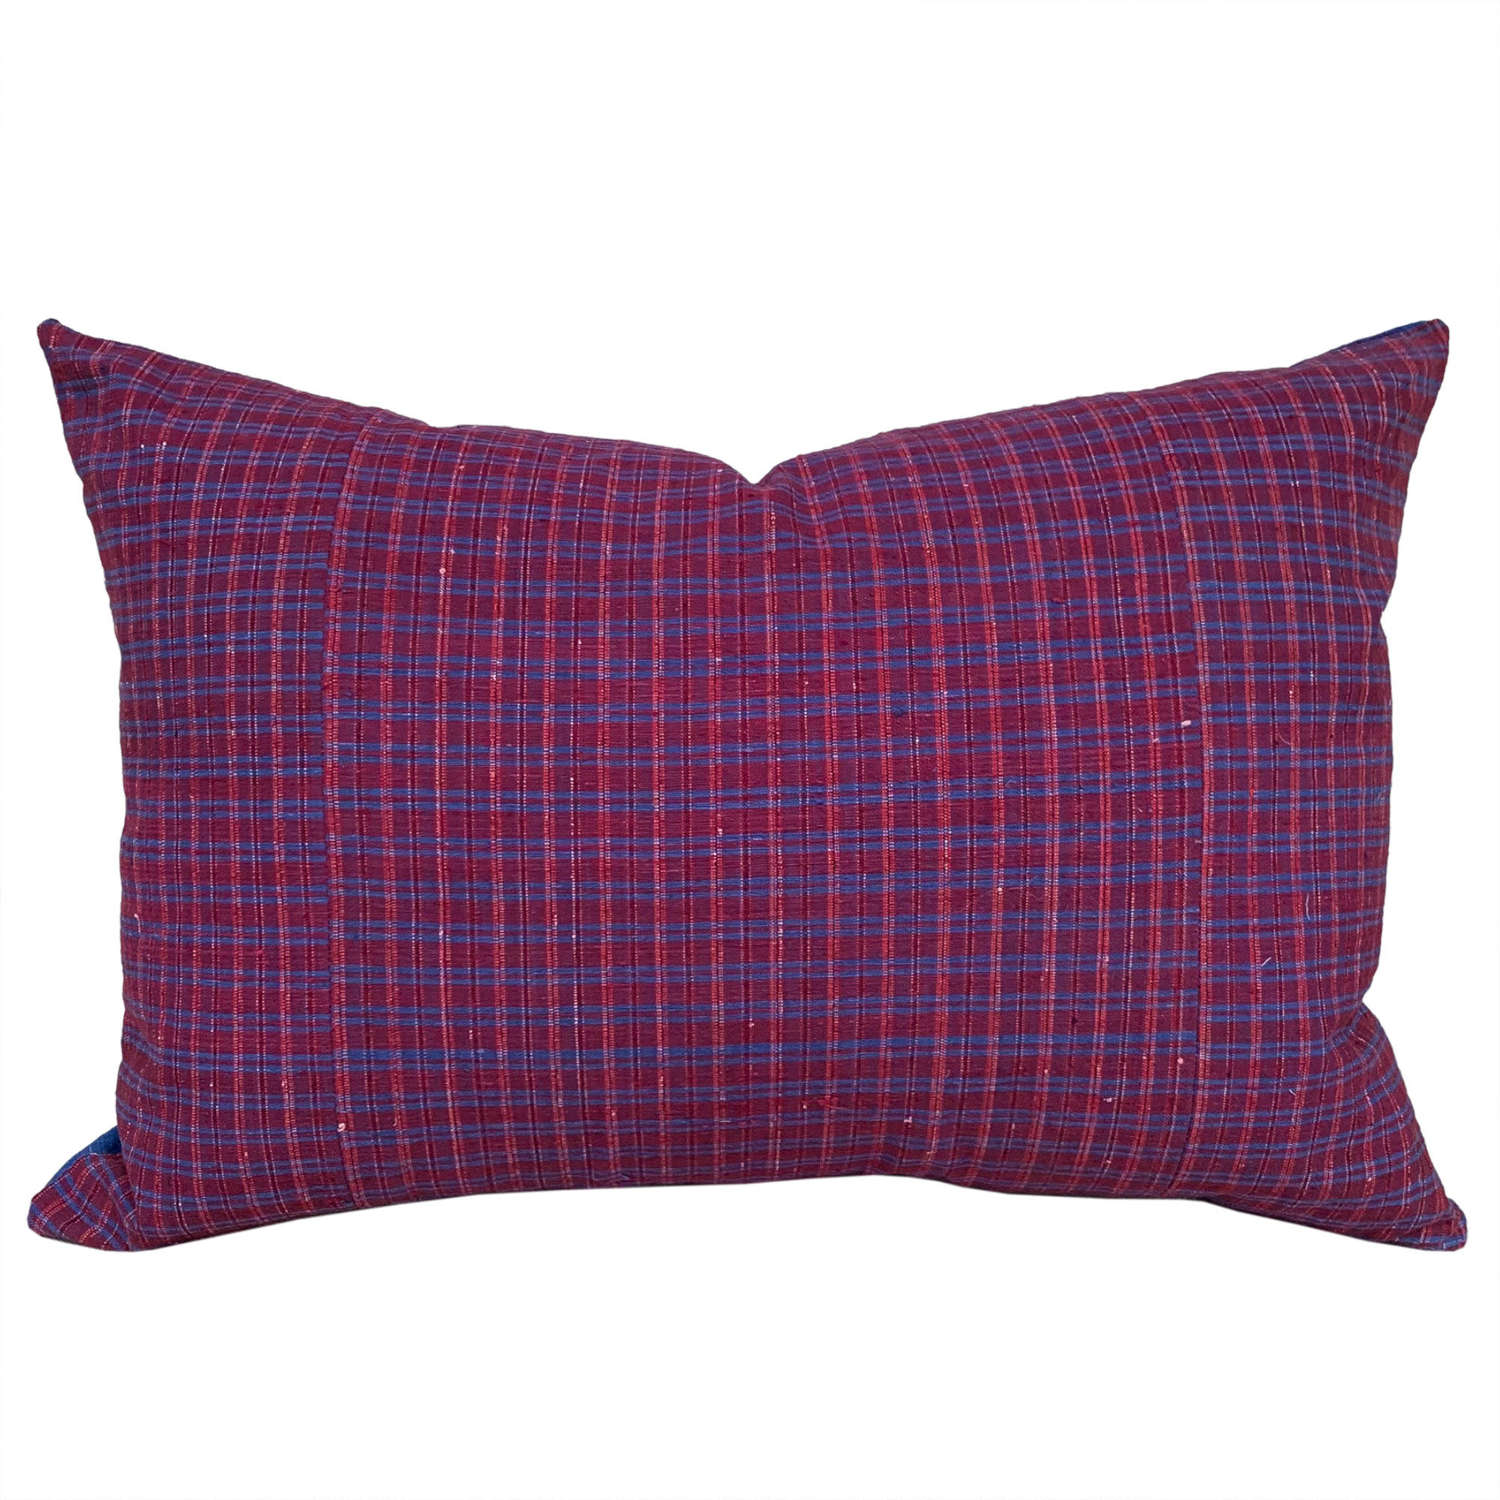 Red And Blue Striped Songjiang Cushions